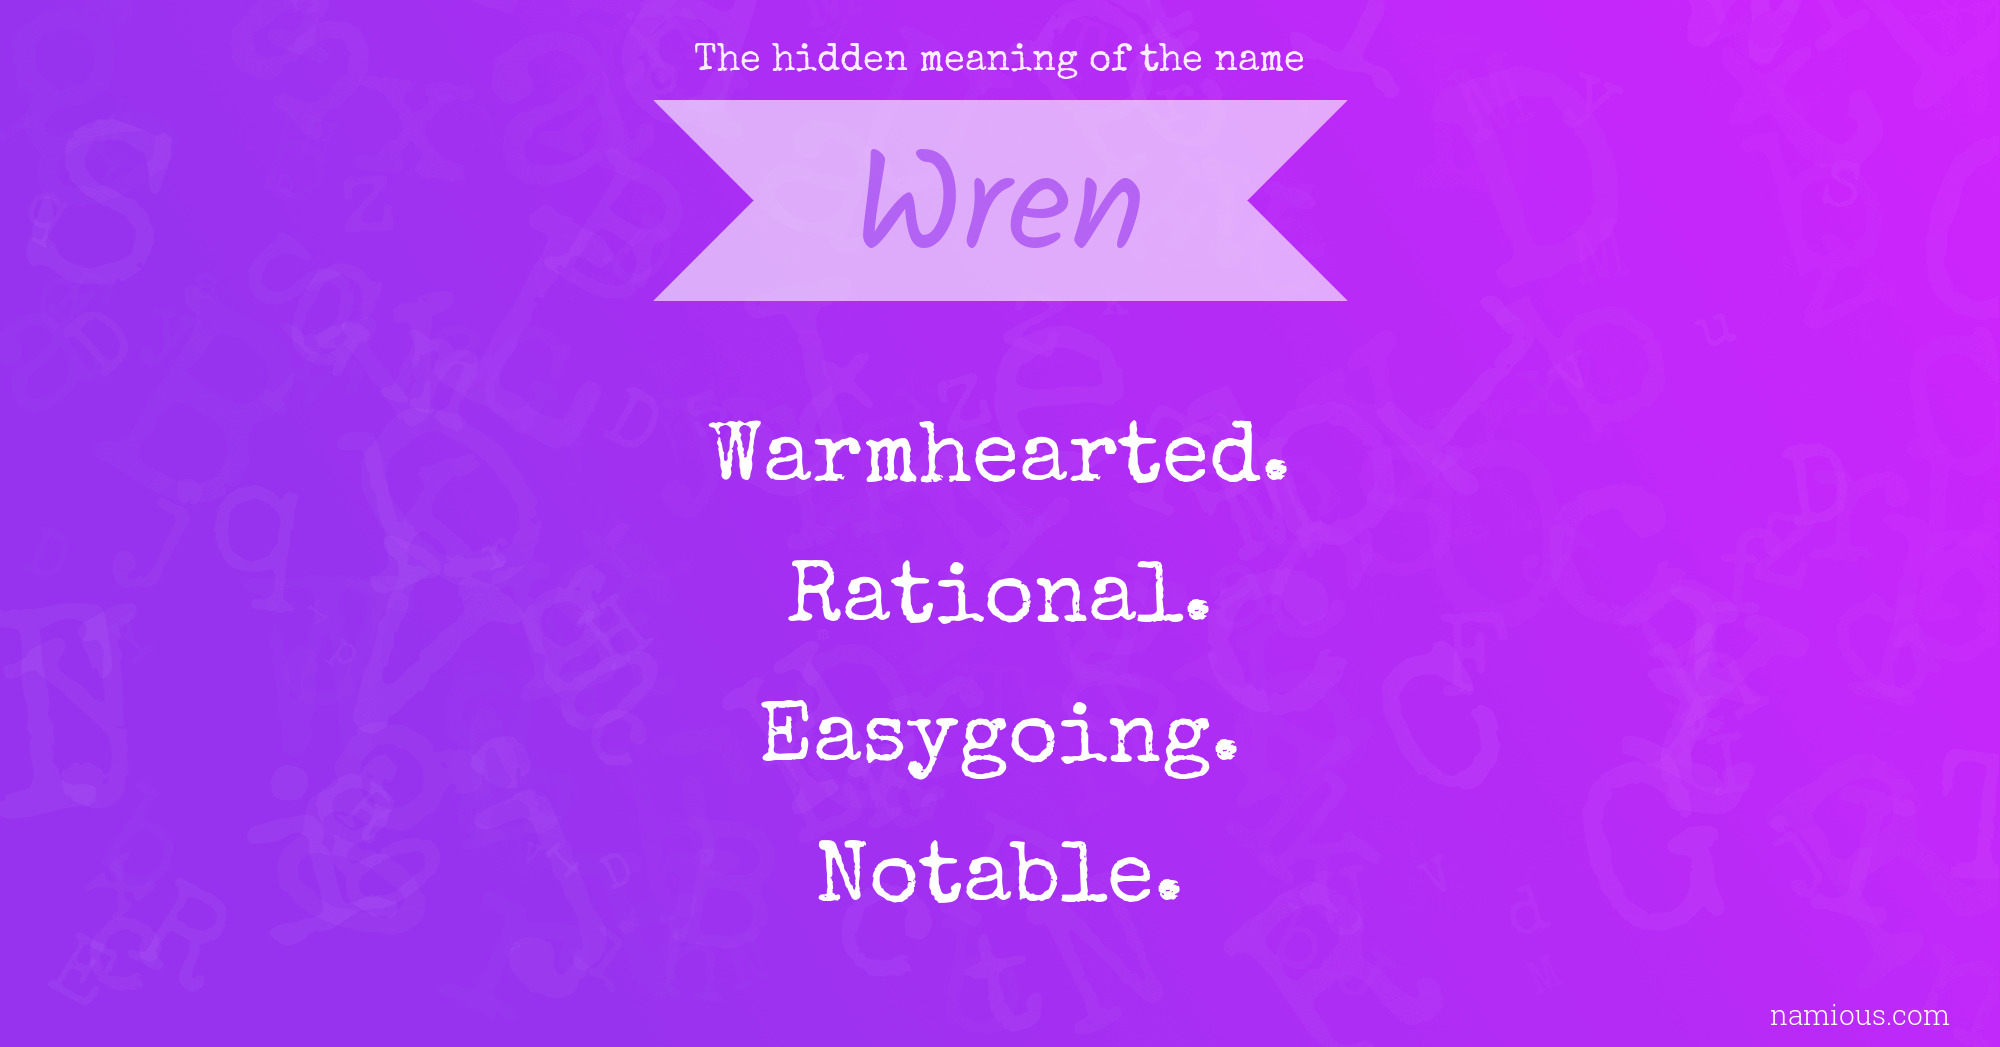 The hidden meaning of the name Wren